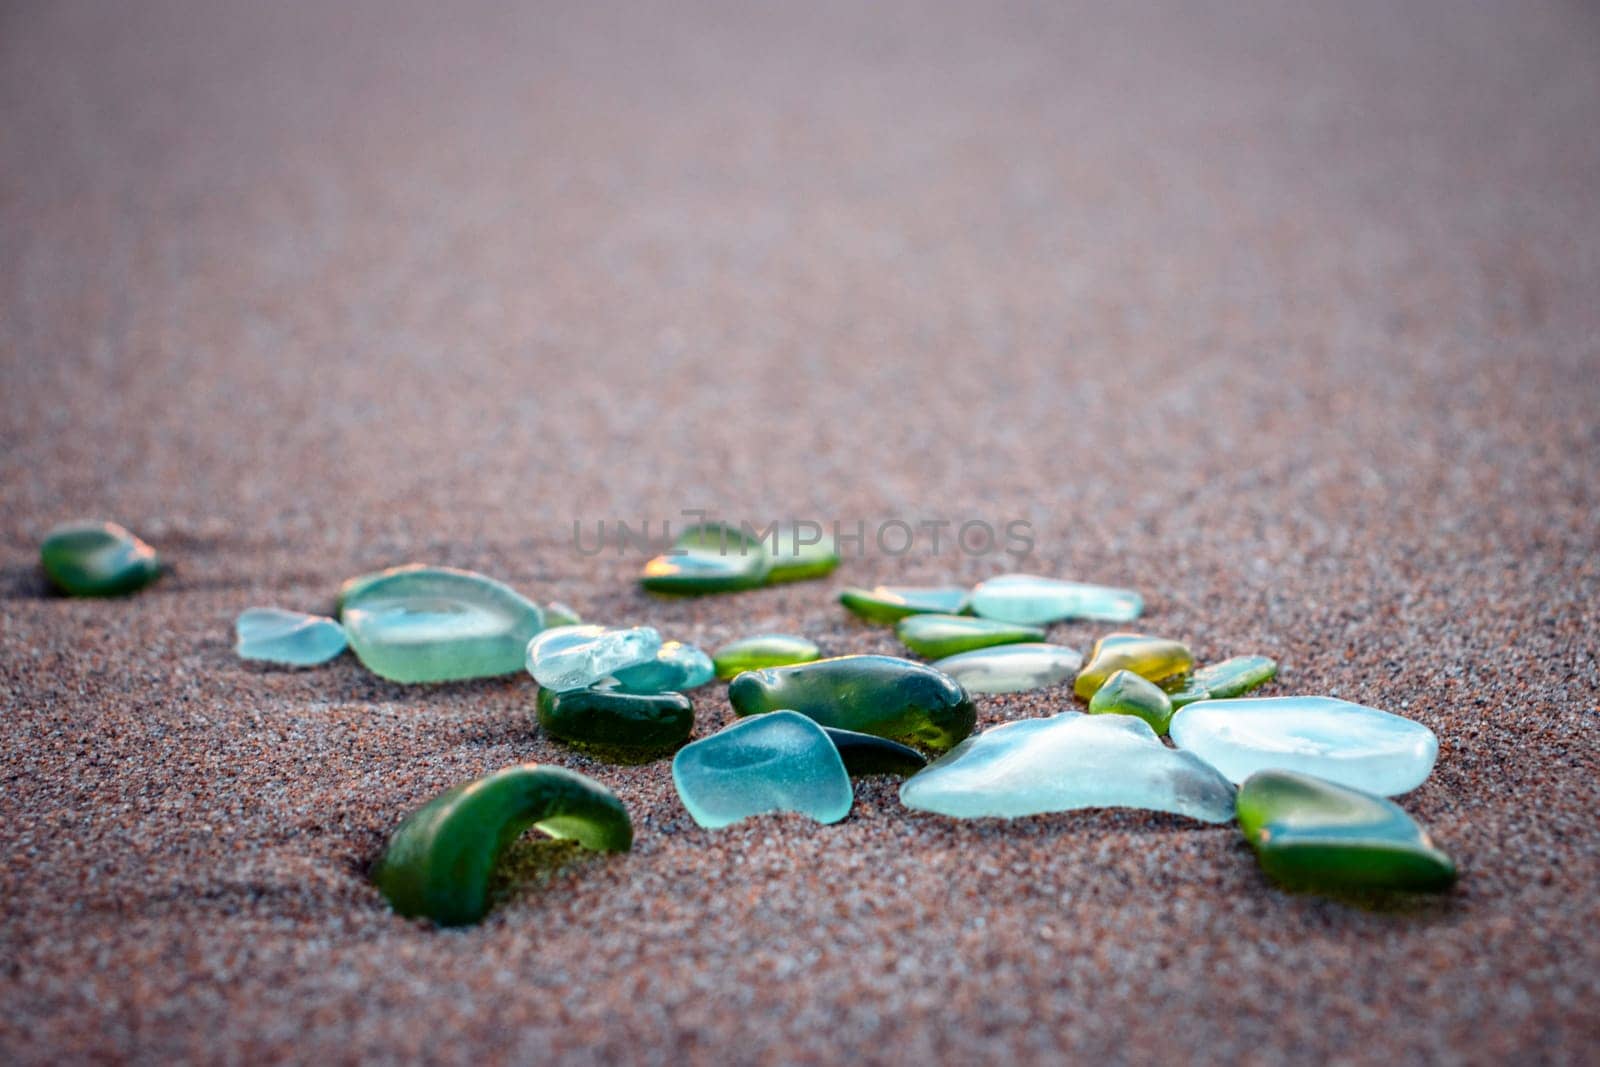 Sand beach and glass stones concept photo. Glass stones from broken bottles polished by the sea. by _Nataly_Nati_